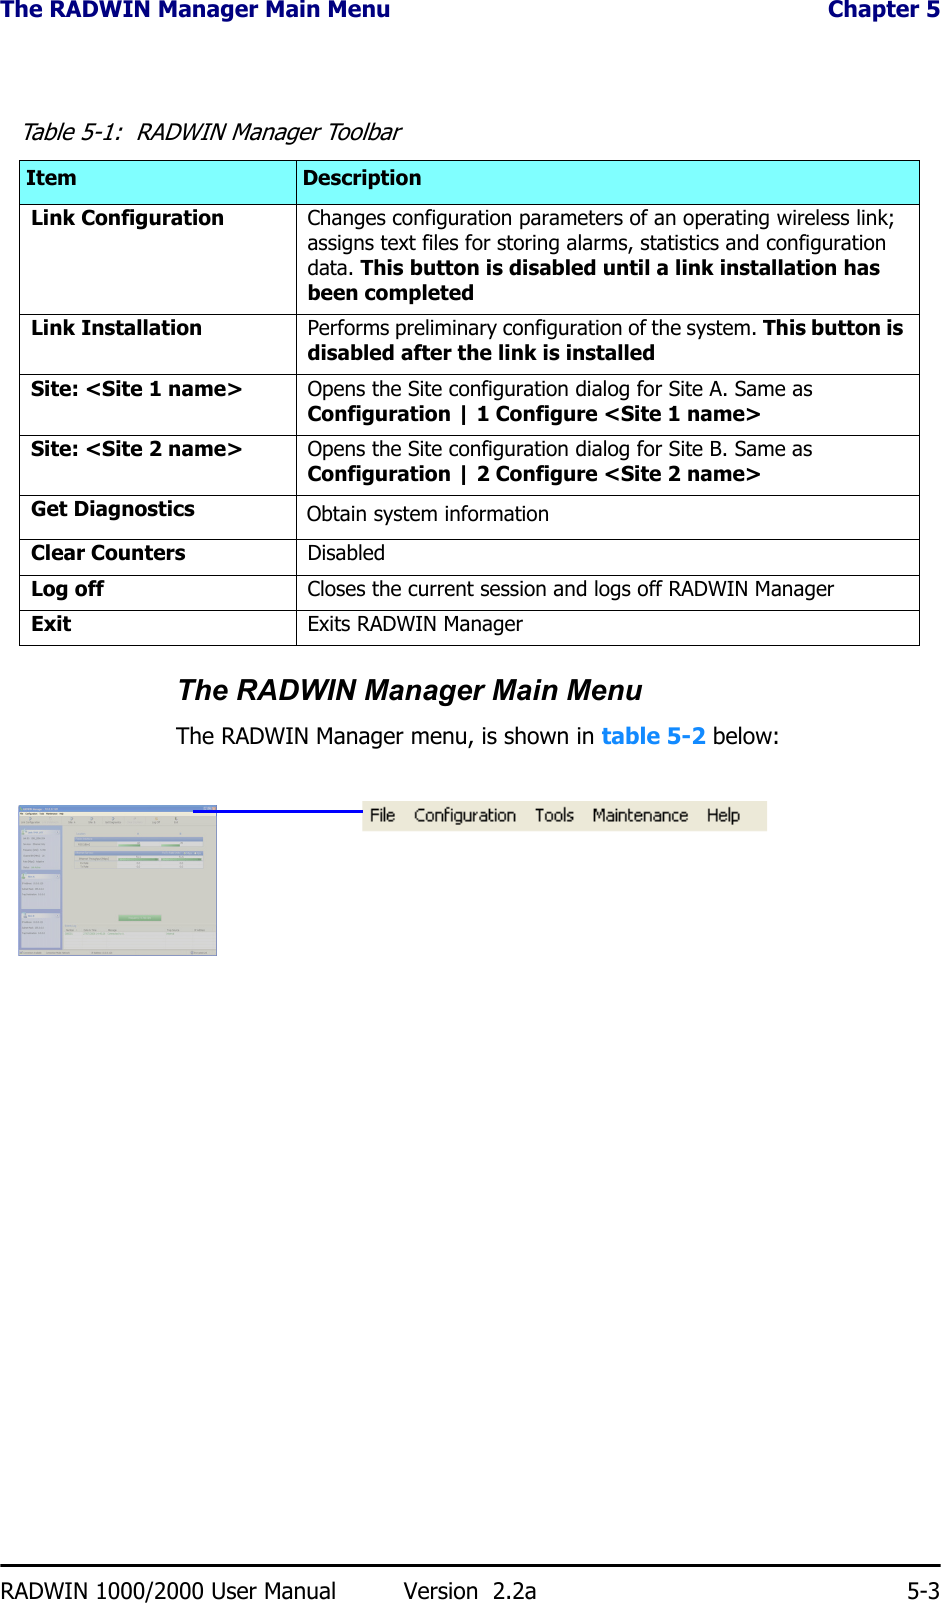 The RADWIN Manager Main Menu  Chapter 5RADWIN 1000/2000 User Manual Version  2.2a 5-3The RADWIN Manager Main MenuThe RADWIN Manager menu, is shown in table 5-2 below:Table 5-1:  RADWIN Manager ToolbarItem DescriptionLink Configuration Changes configuration parameters of an operating wireless link; assigns text files for storing alarms, statistics and configuration data. This button is disabled until a link installation has been completedLink Installation Performs preliminary configuration of the system. This button is disabled after the link is installedSite: &lt;Site 1 name&gt; Opens the Site configuration dialog for Site A. Same as Configuration | 1 Configure &lt;Site 1 name&gt;Site: &lt;Site 2 name&gt; Opens the Site configuration dialog for Site B. Same as Configuration | 2 Configure &lt;Site 2 name&gt;Get Diagnostics Obtain system informationClear Counters DisabledLog off Closes the current session and logs off RADWIN ManagerExit Exits RADWIN Manager